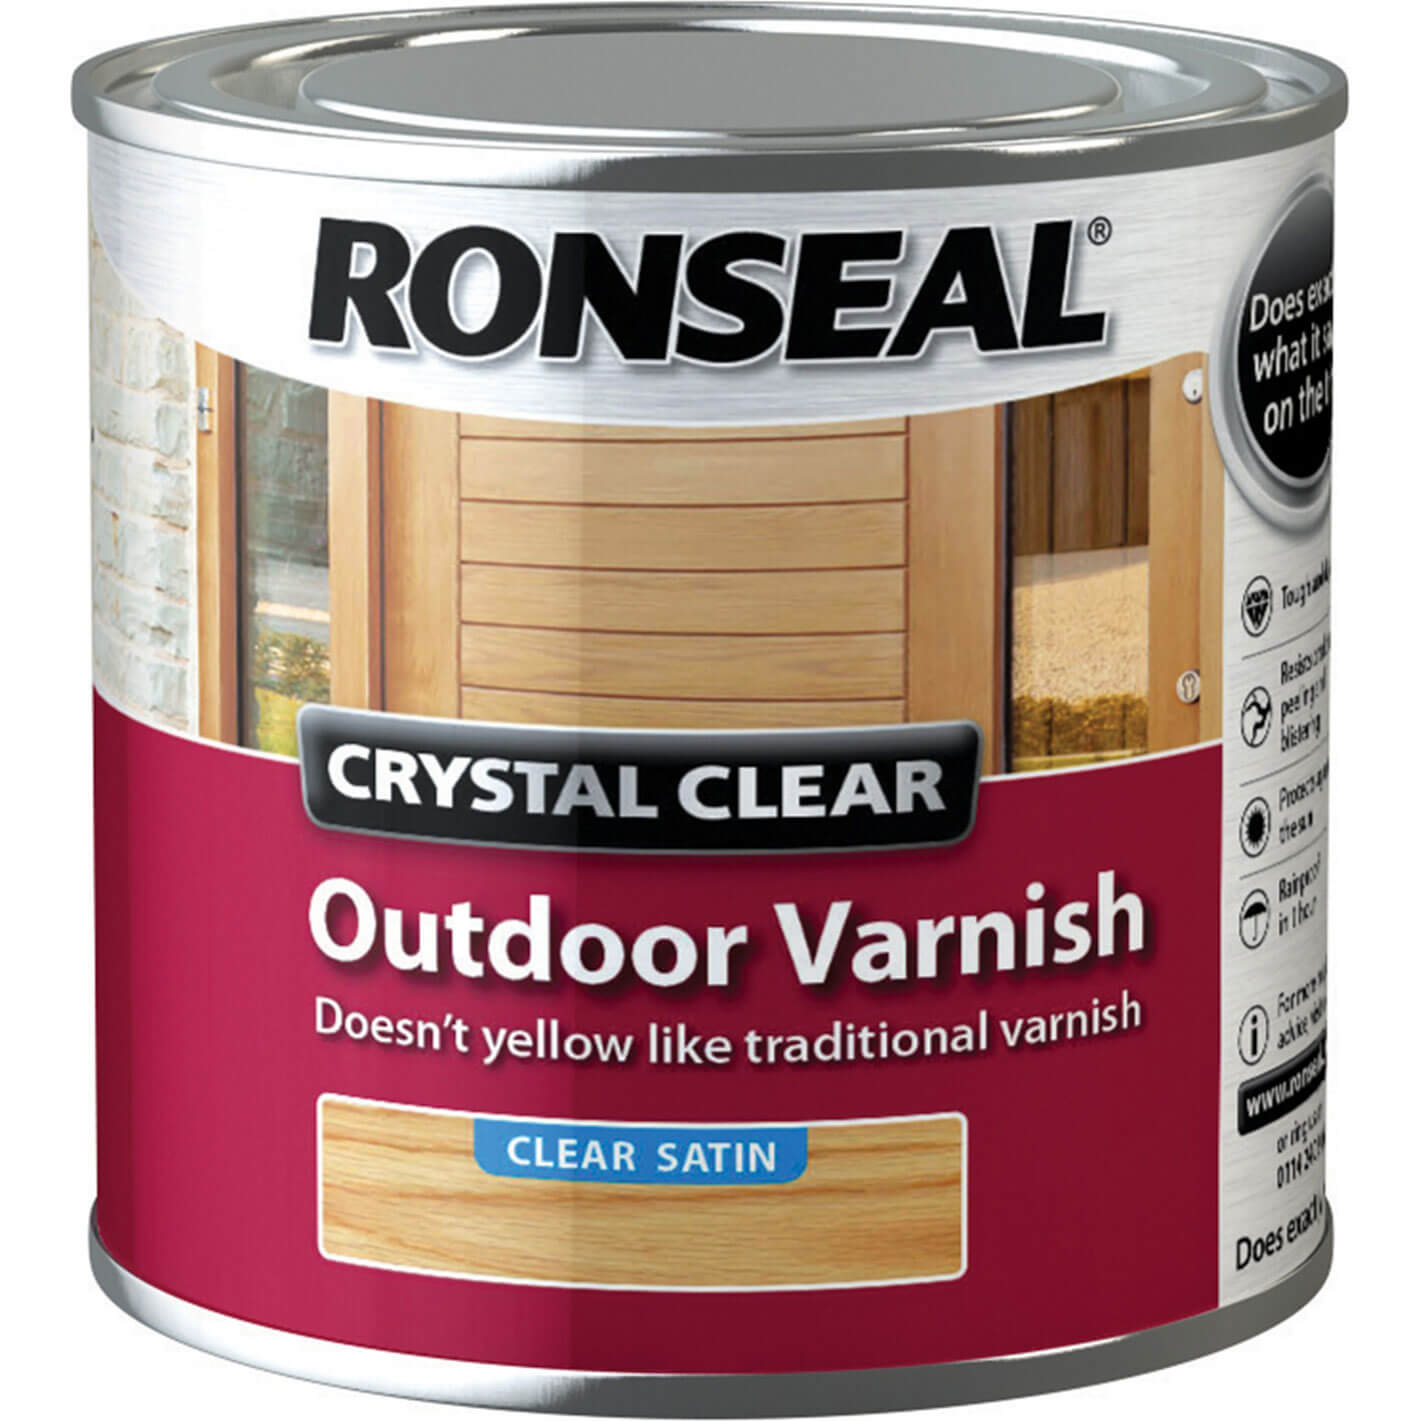 Image of Ronseal Crystal Clear Outdoor Varnish Satin 250ml